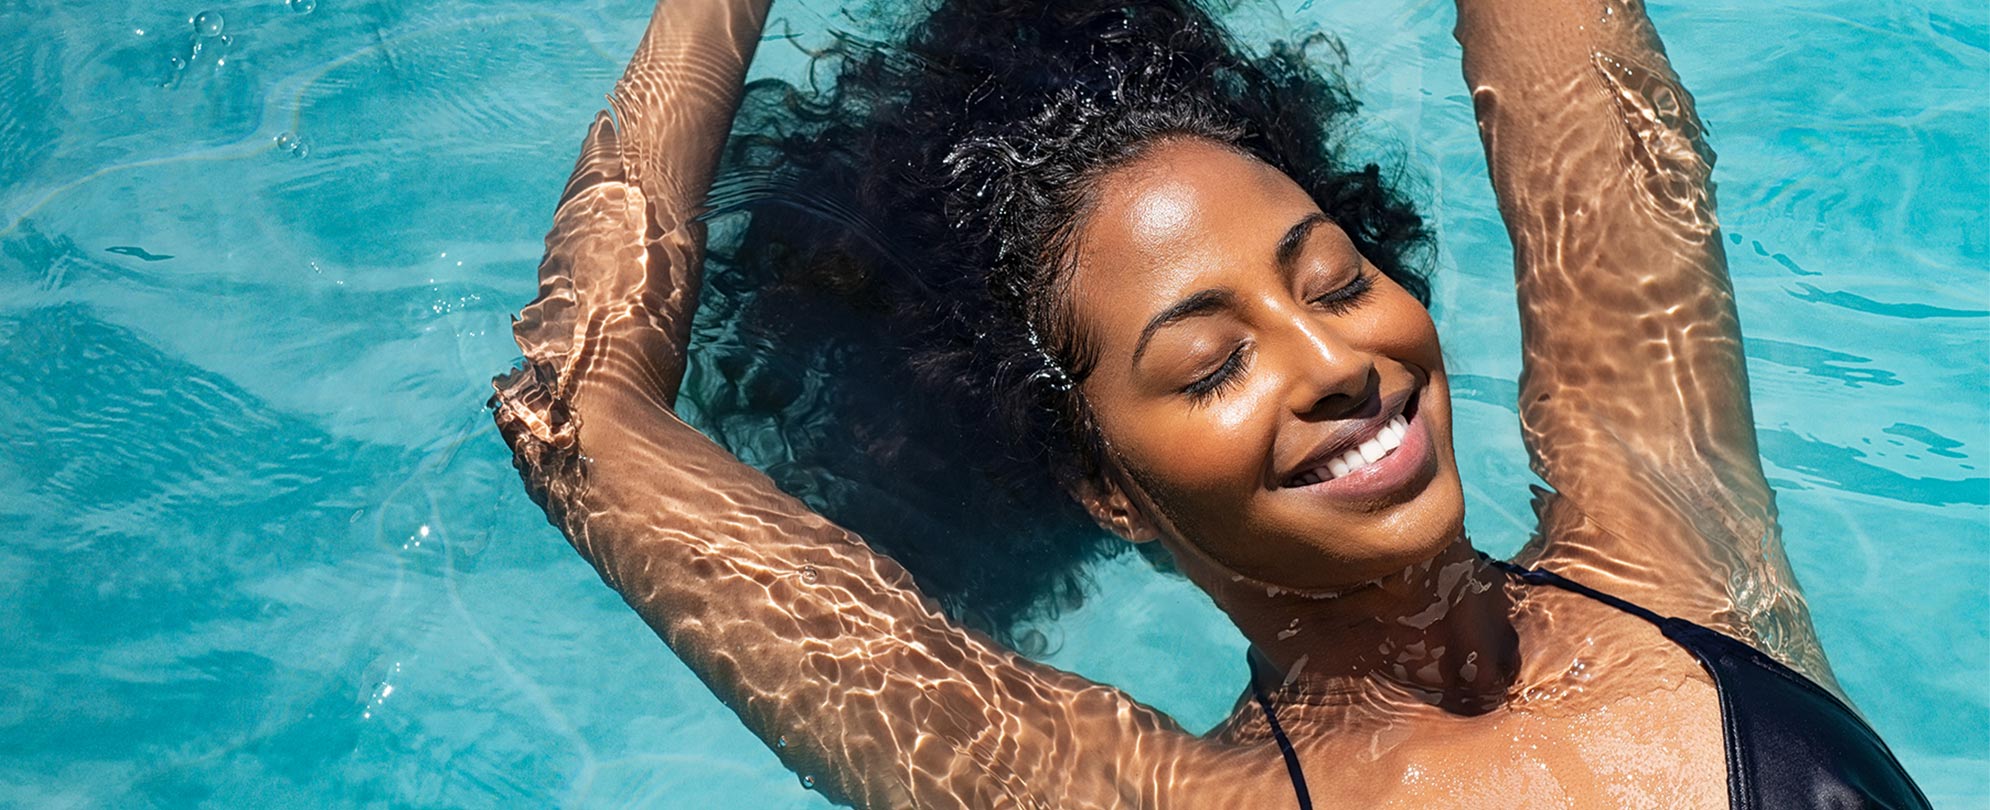 A smiling, African American woman relaxes with her eyes closed floating in a pool.